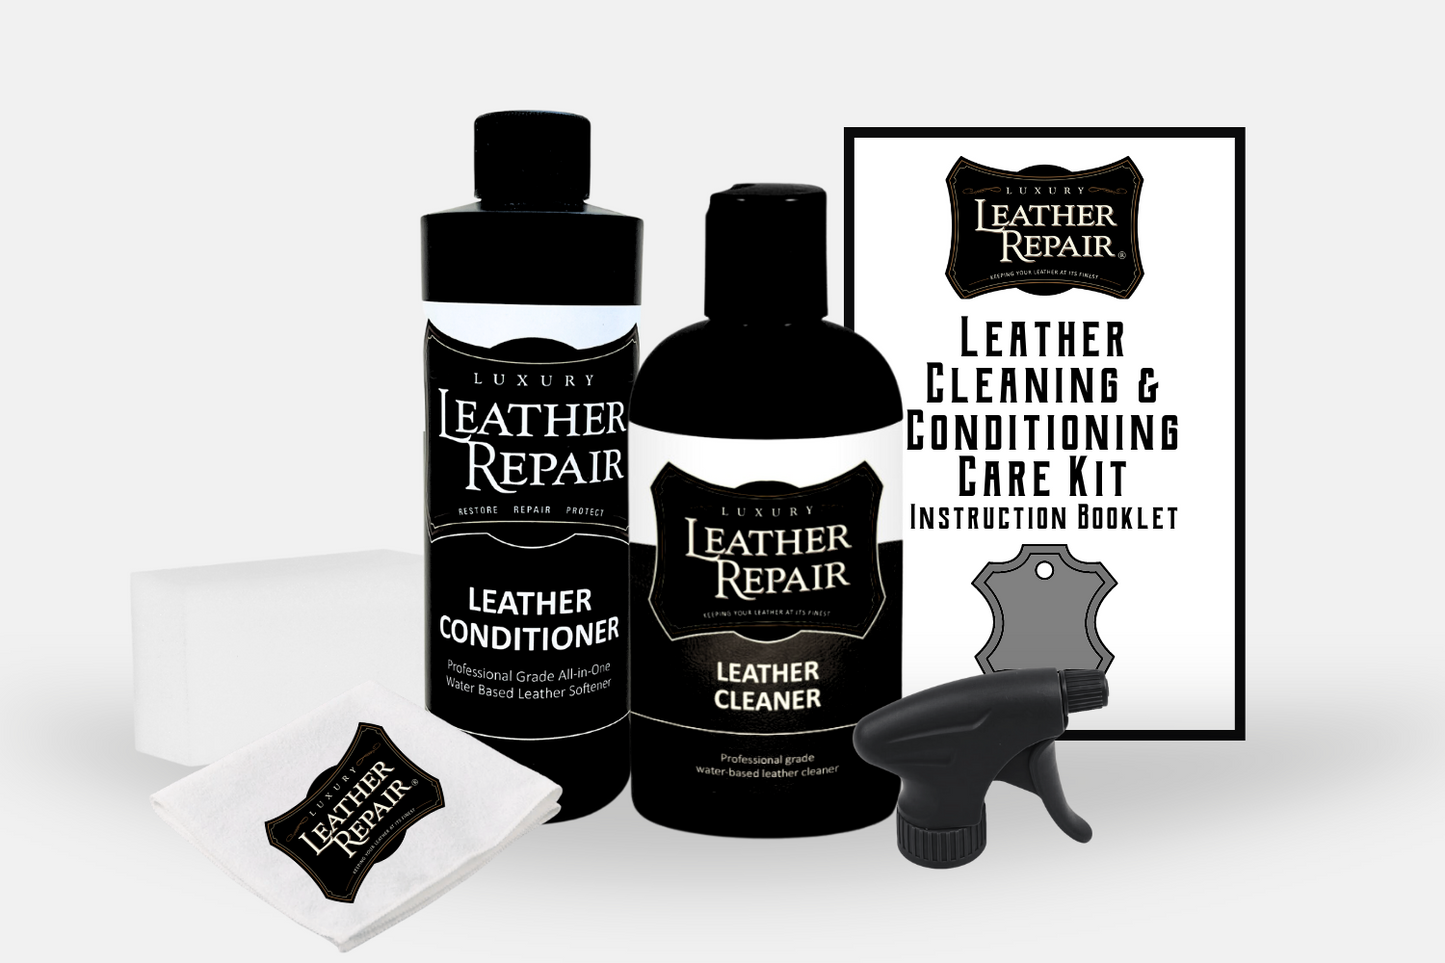 UNITERS Leather Care KIT Cleaning and Conditioning (250ml) - Leather  Cleaning Kit with Leather Soft Cleaner and Leather Conditioning Cream for